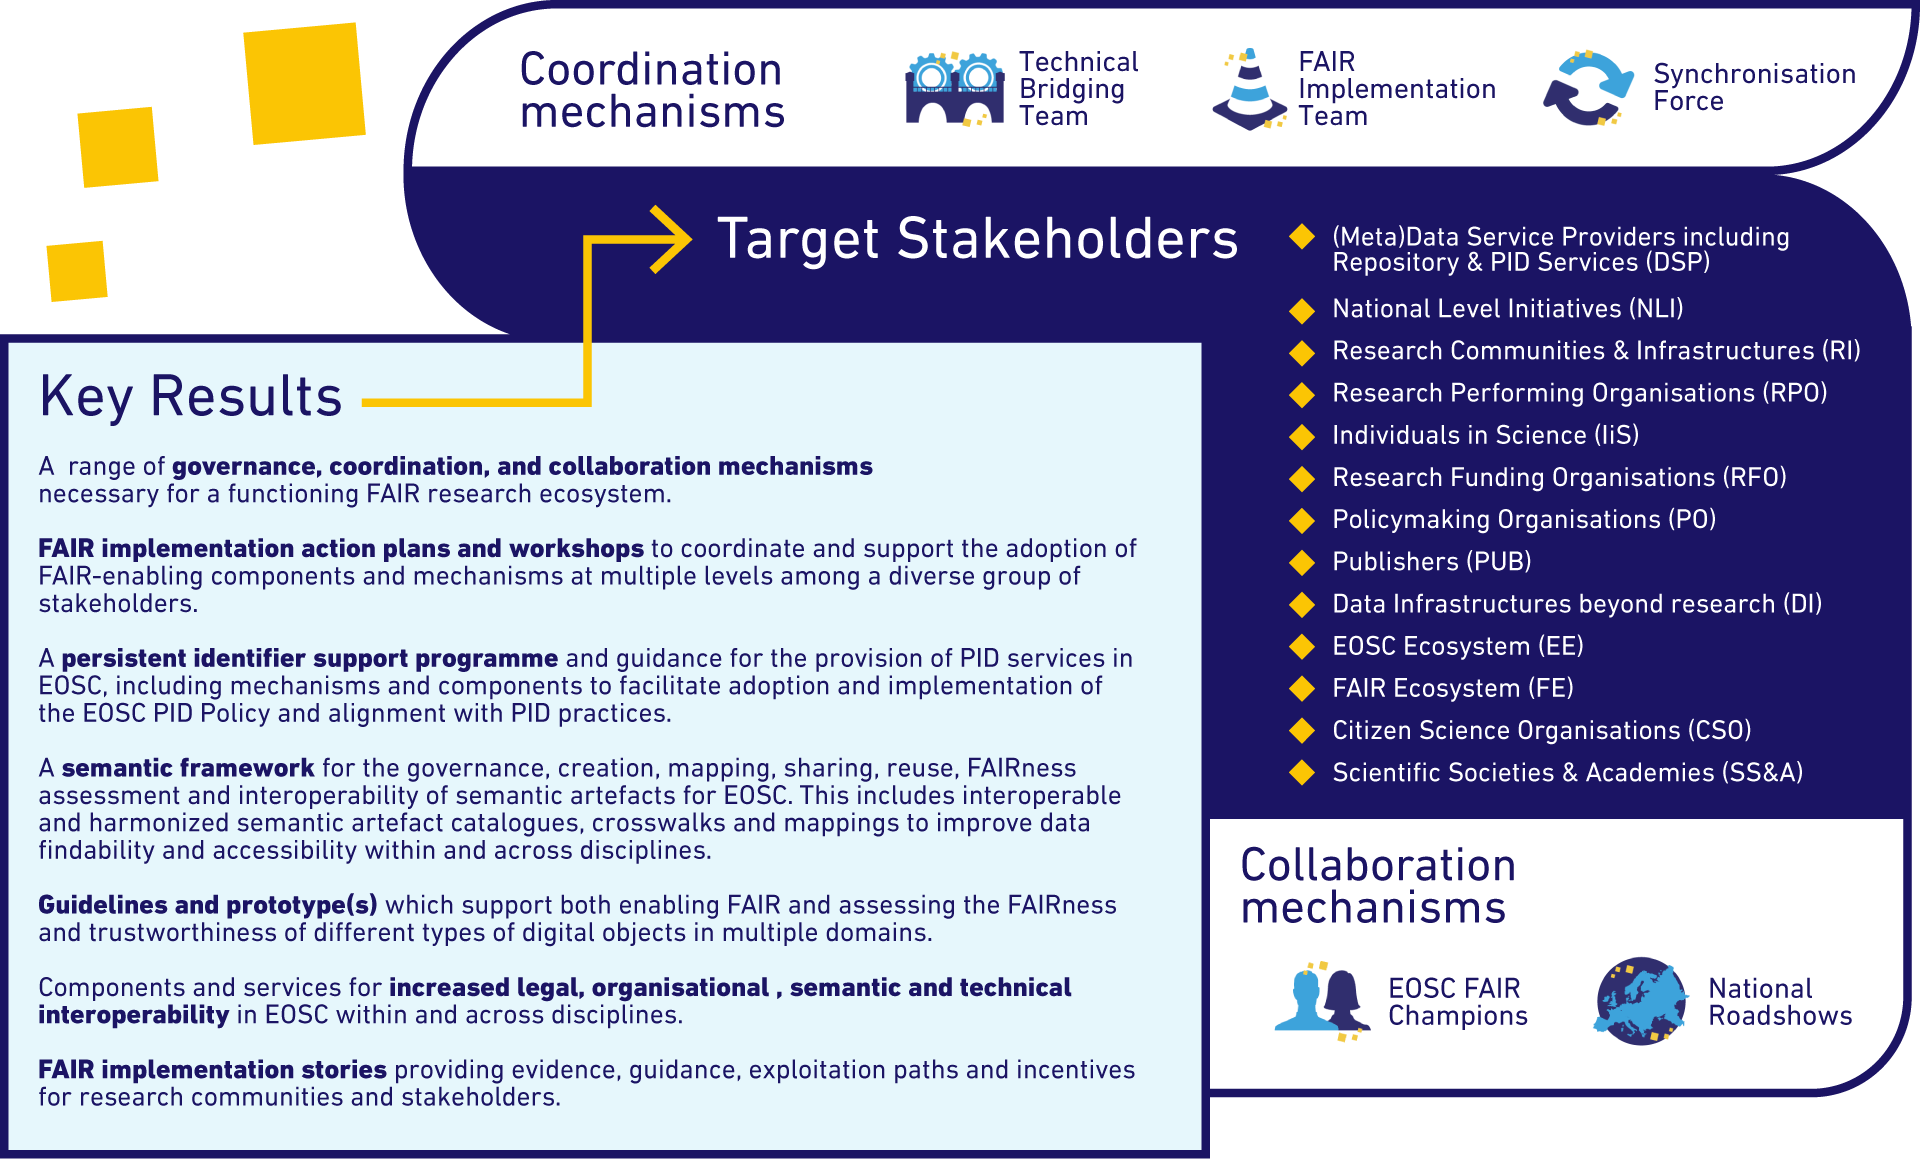 Graphics: Coordination mechanisms, Target Stakeholders, Key Results and Collaboration Mechanisms